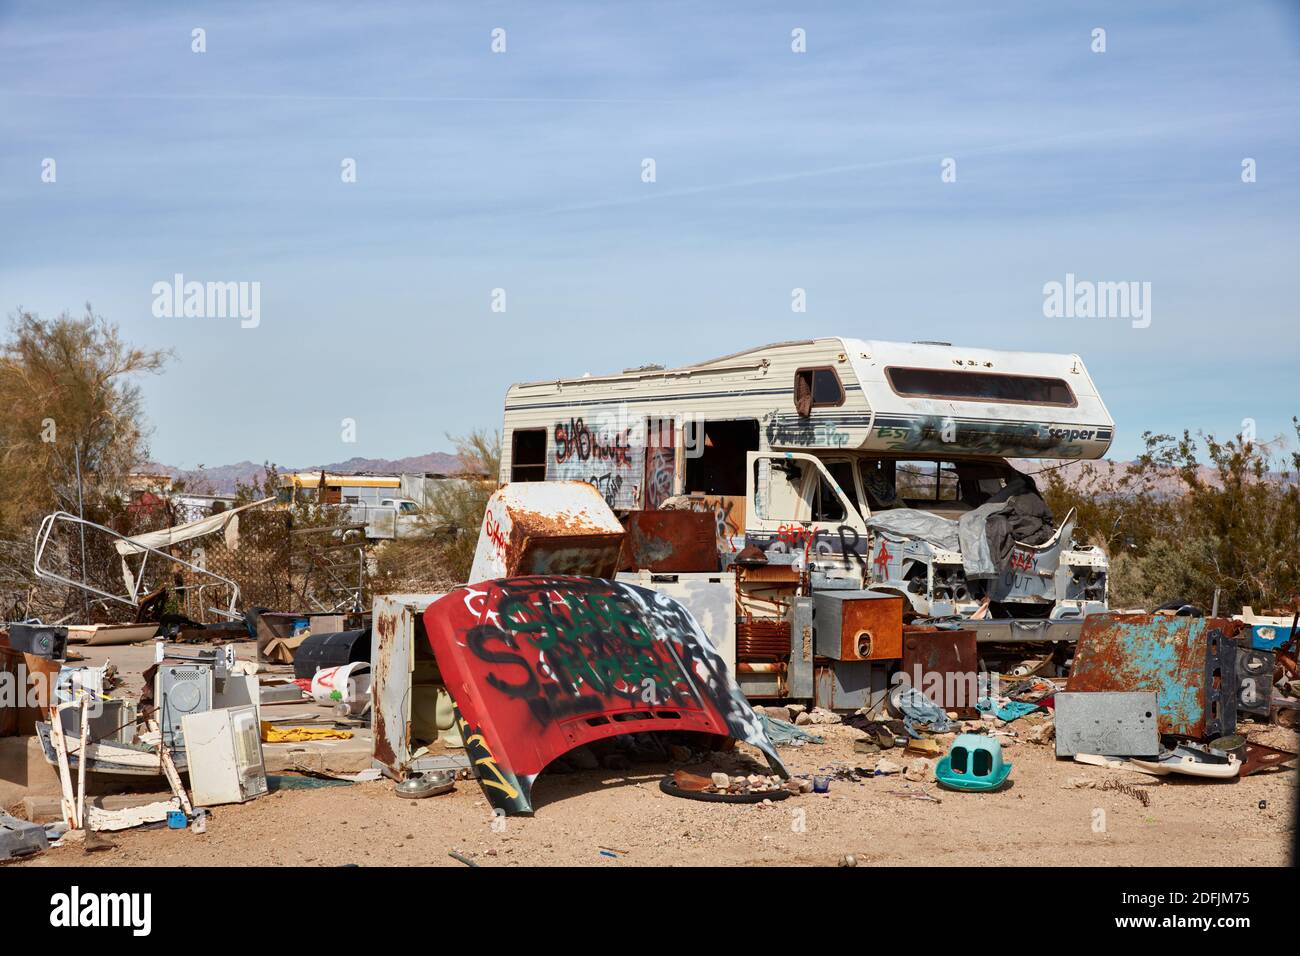 Abandoned RV sitting among discarded appliances and car parts in Slab City, California Stock Photo